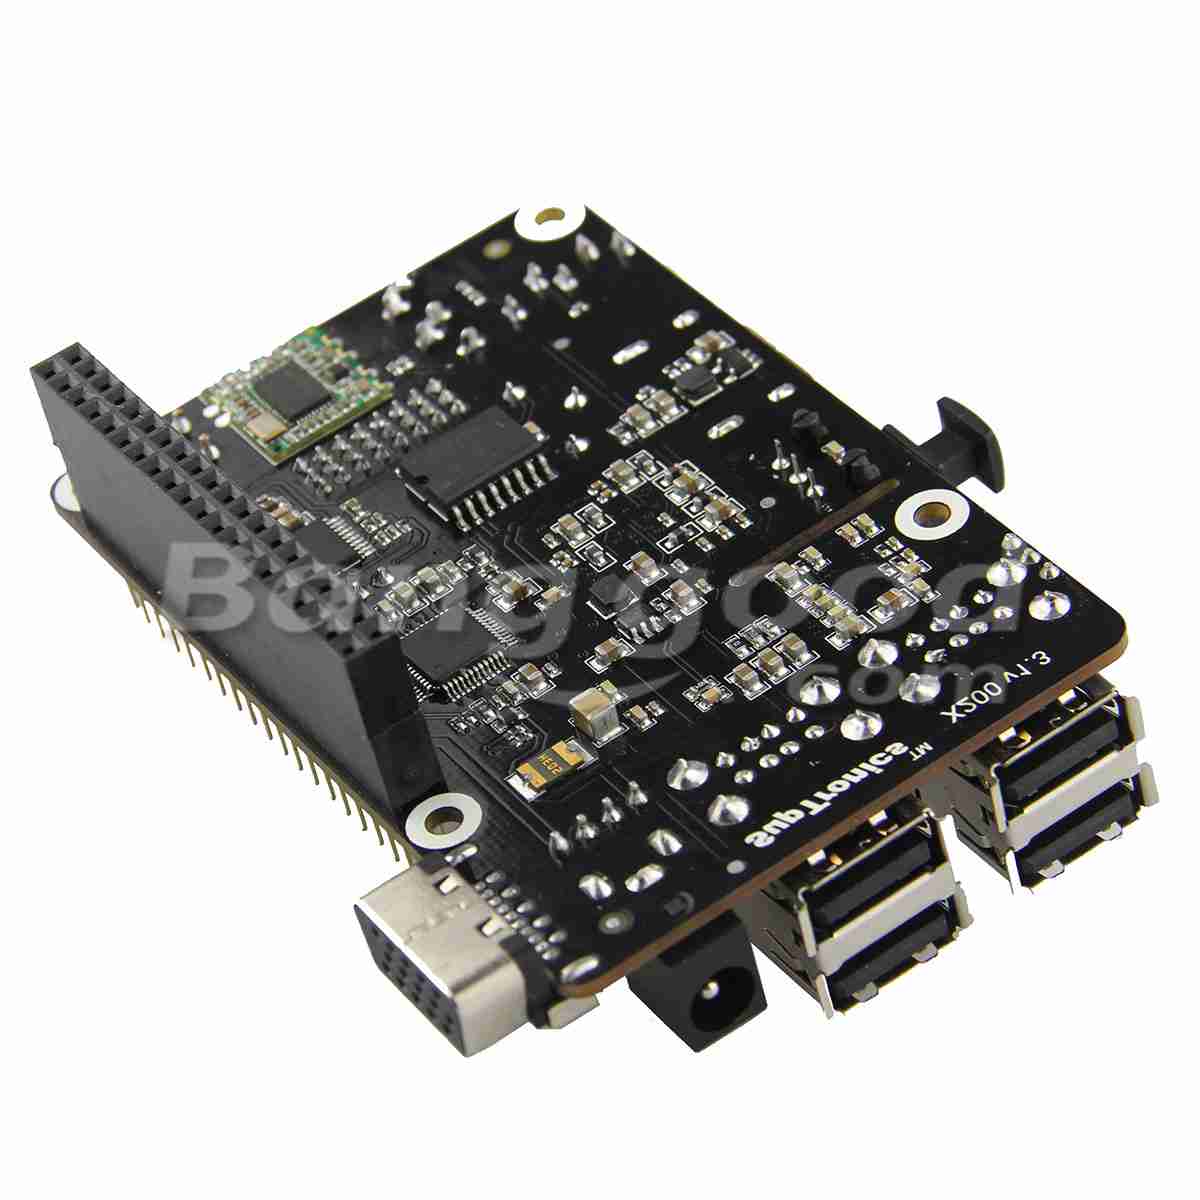 Supstronics-X200-Multifunction-Expansion-Board-For-Raspberry-Pi-B-960113